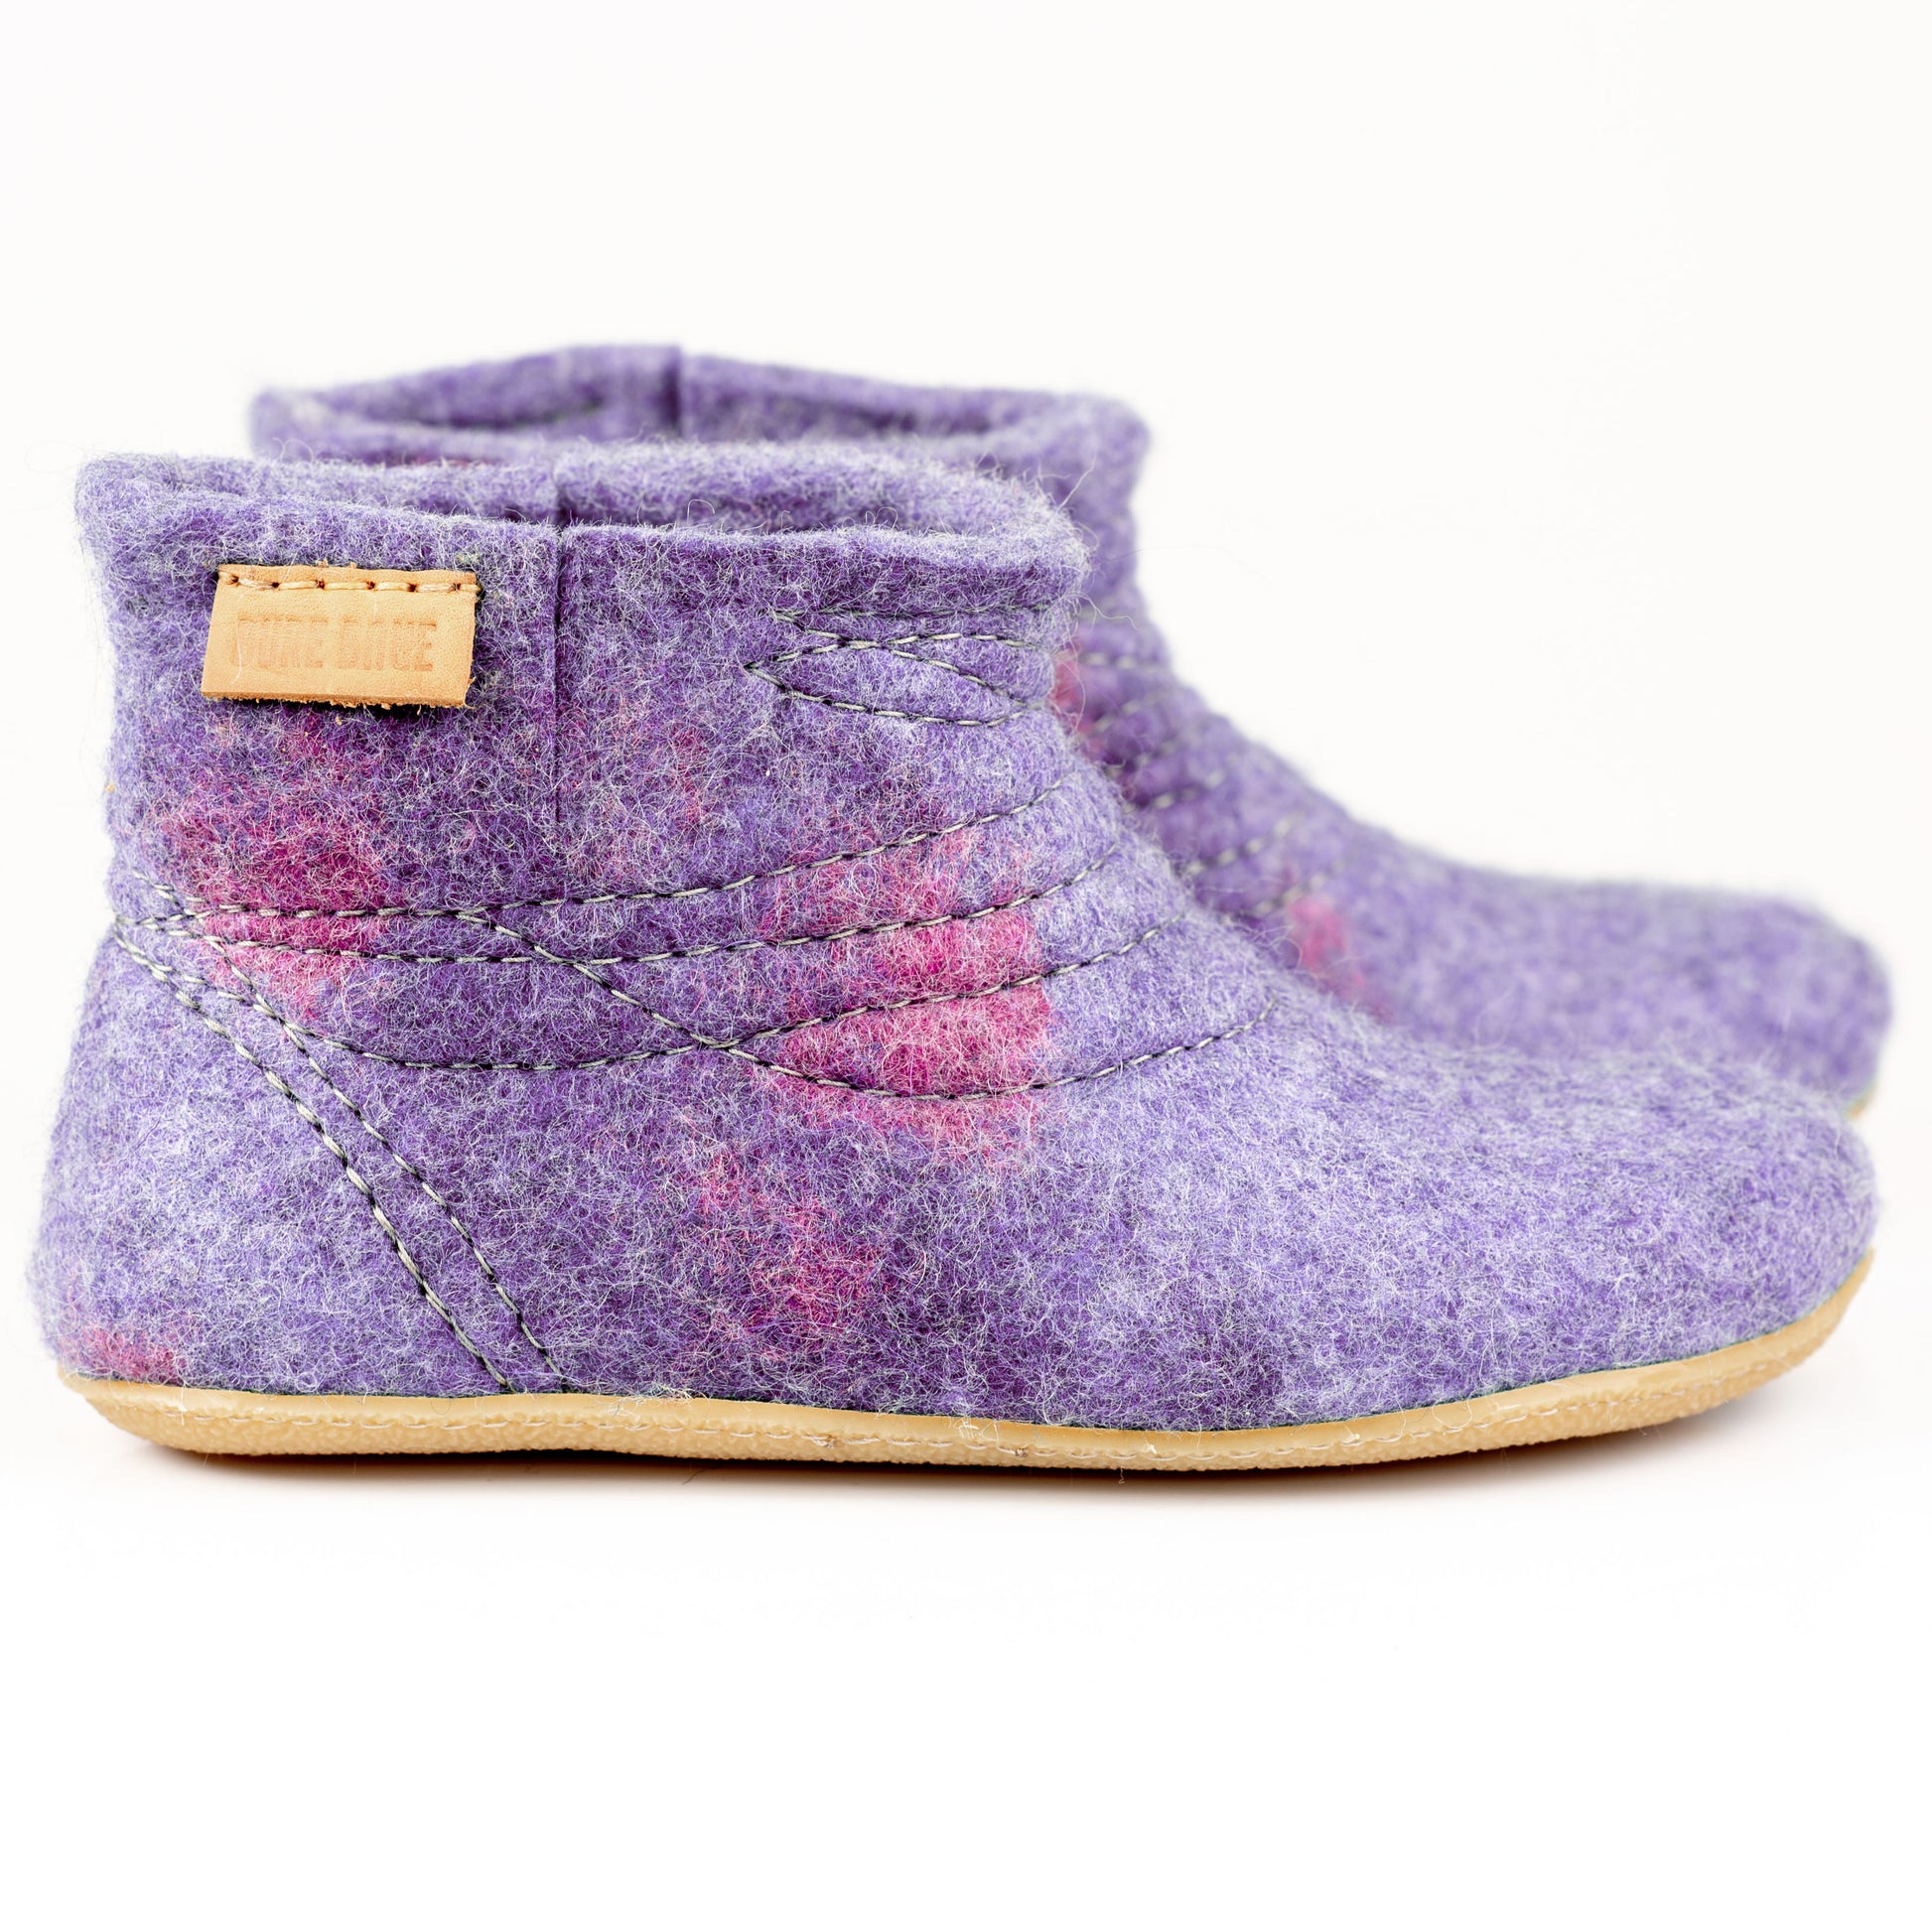 lilac felted wool middle ankle boots with sturdy stitching and short side cuts